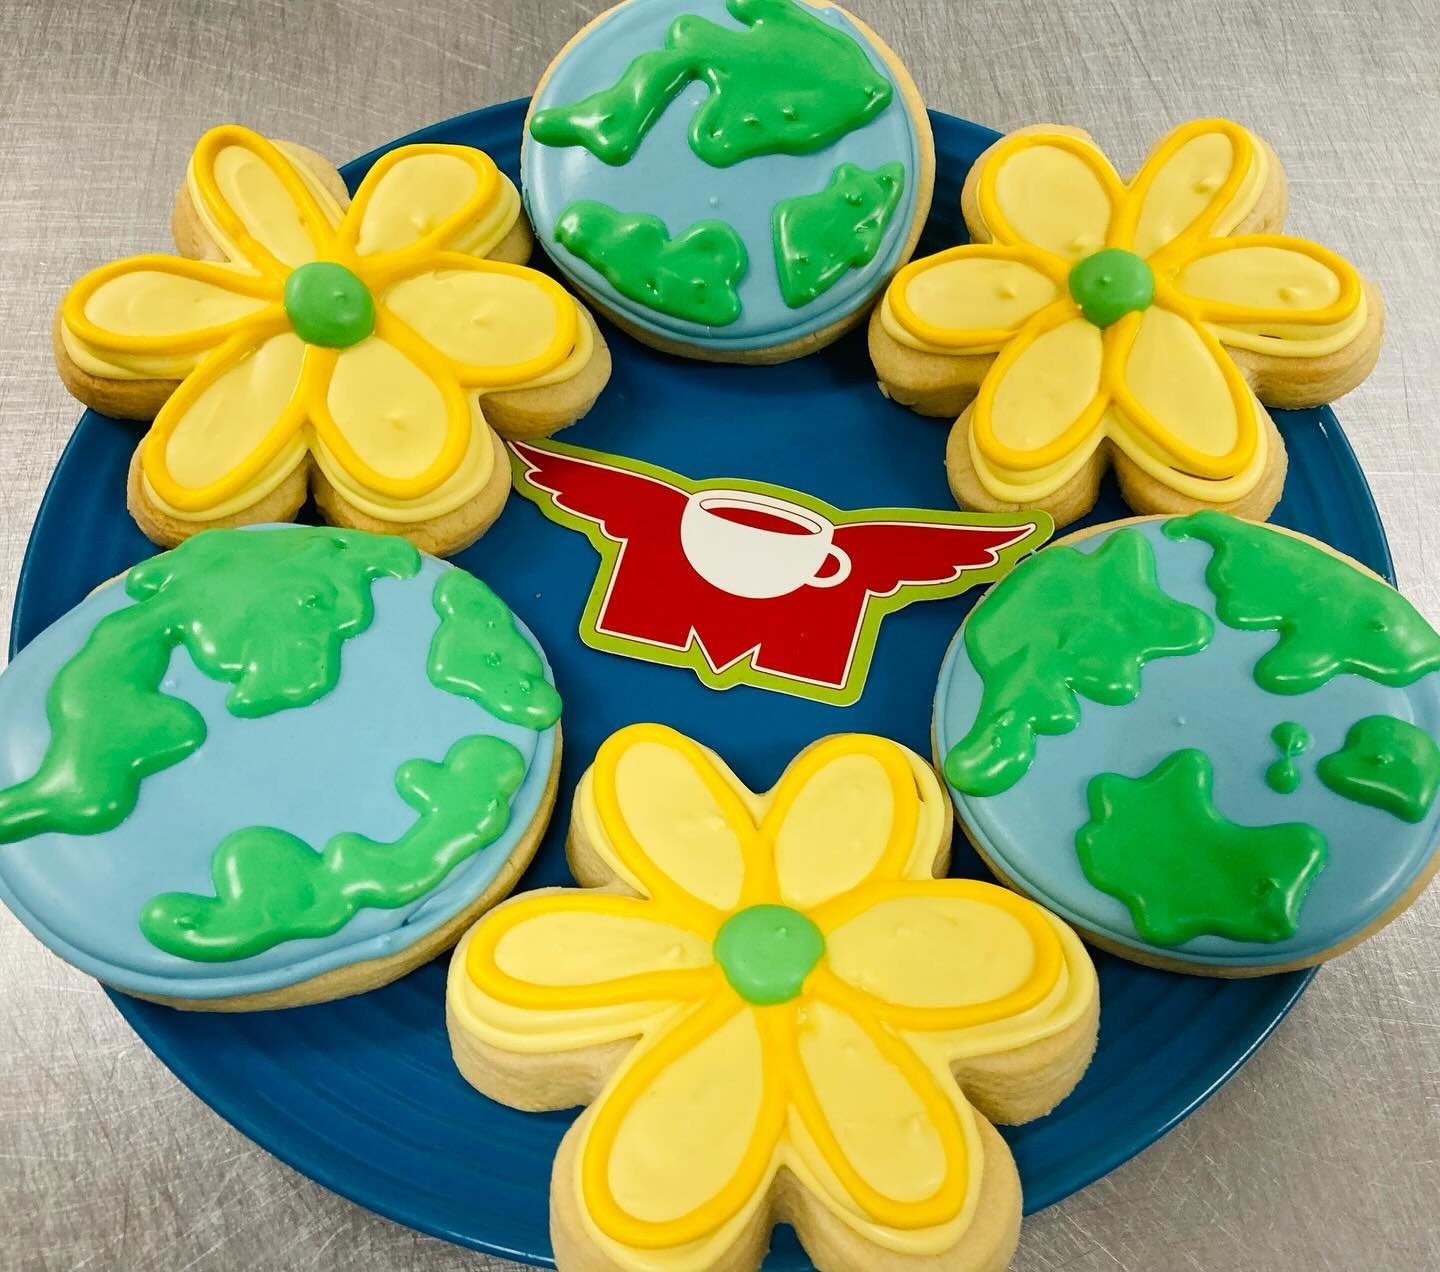 Happy Earth day! Celebrate with a Sugar Cookie! 🌎🌳 #flyingmboise #flyingm #downtownboise